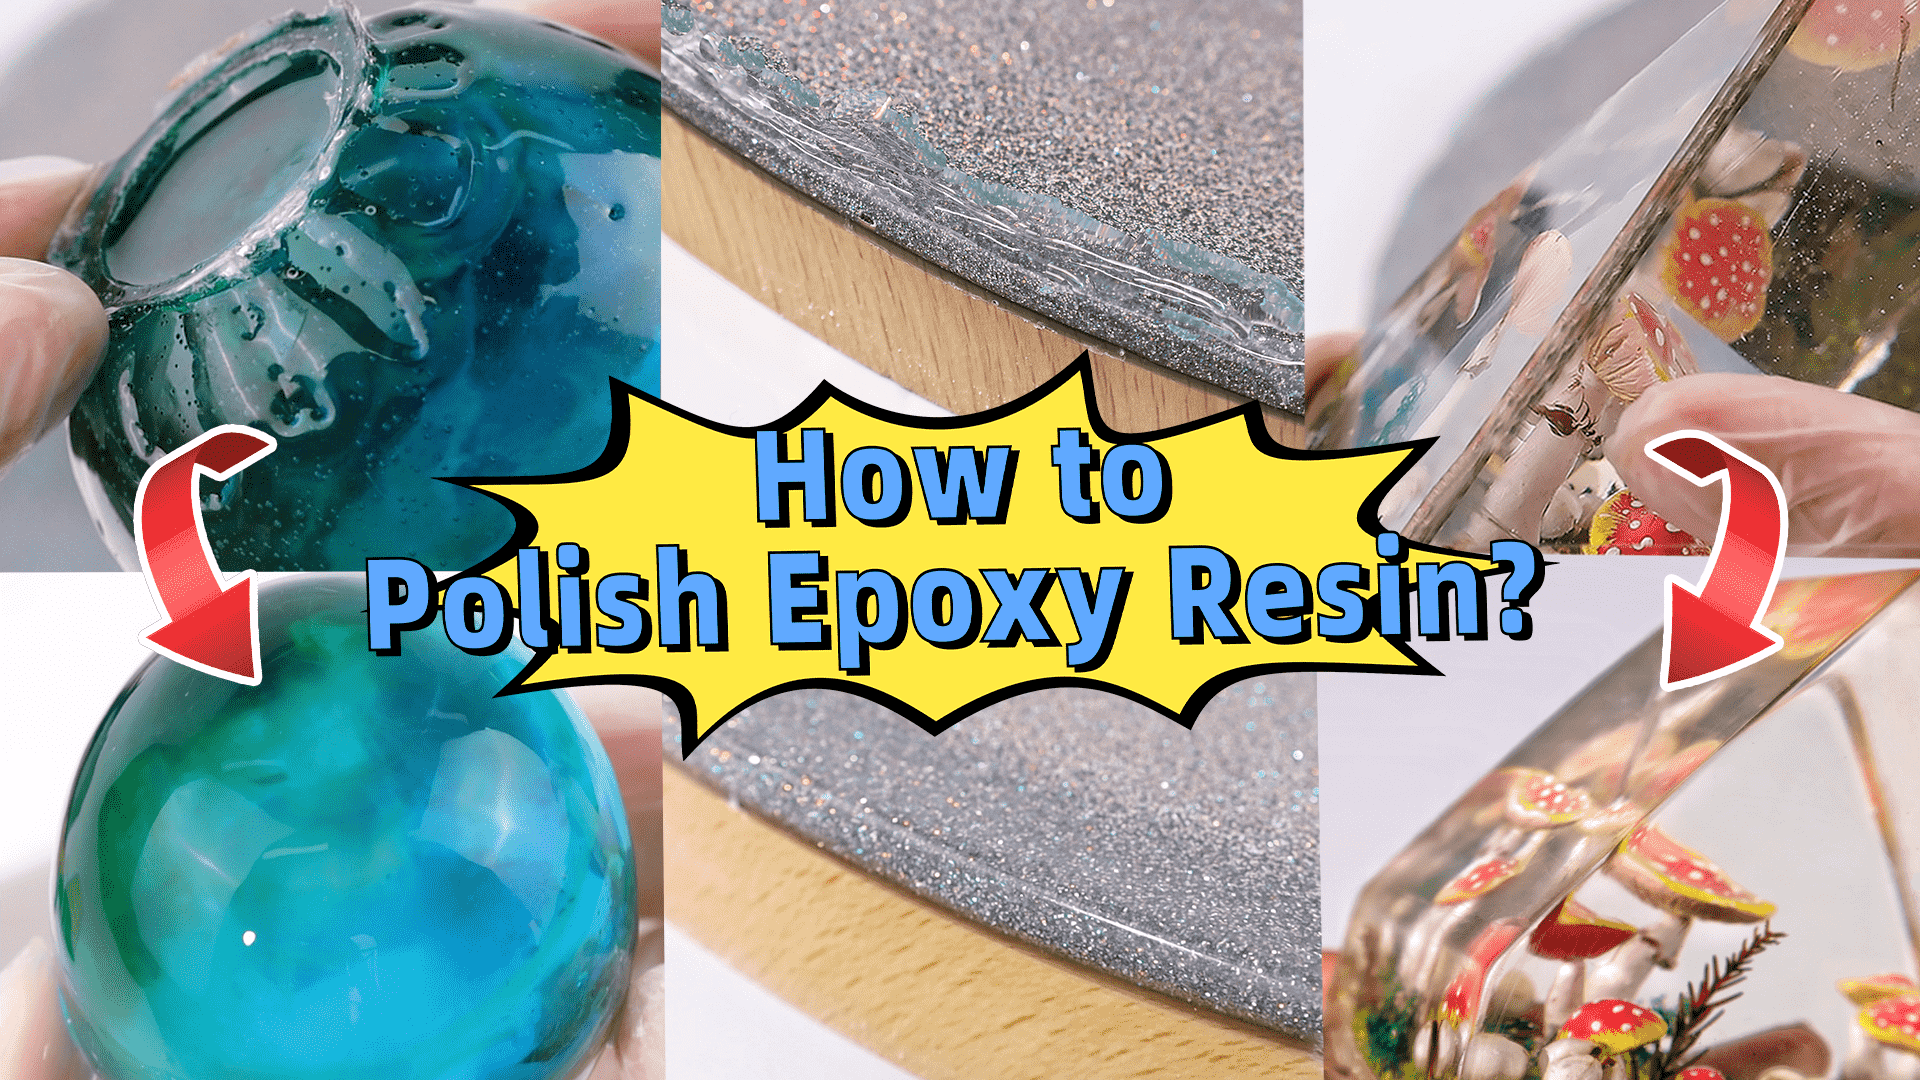 How to Polish Epoxy Resin – Let's Resin